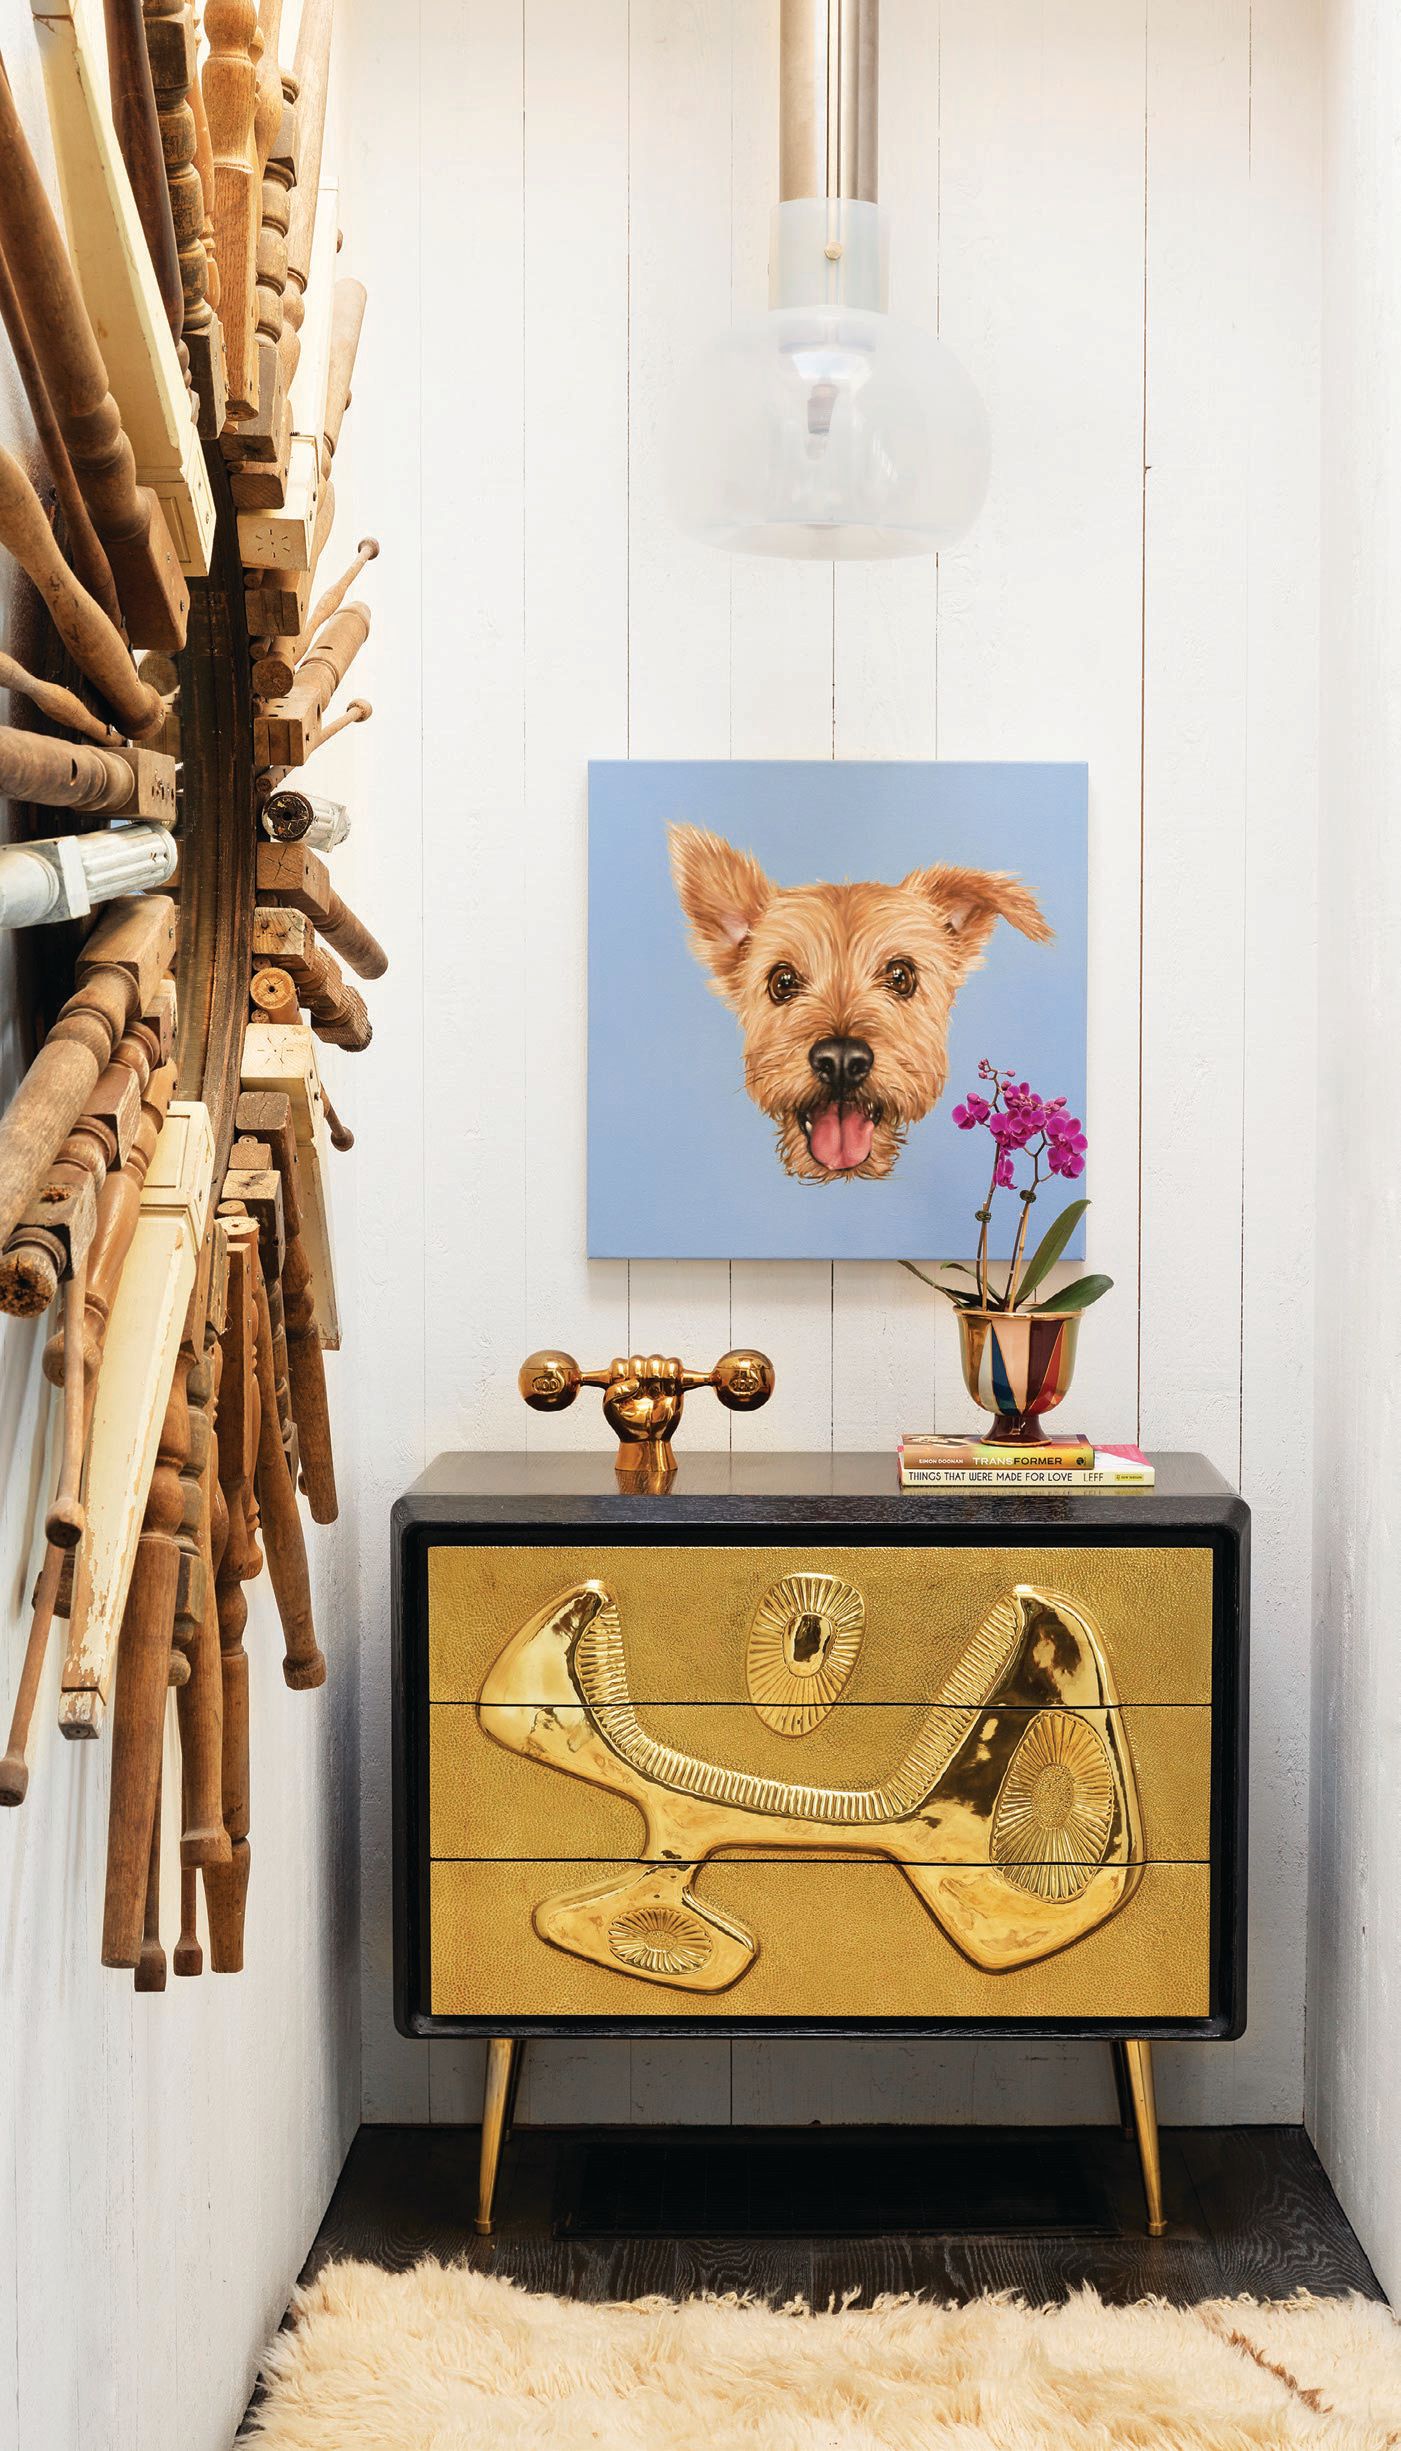 A painting of FoxyLady presides over a Jonathan Adler Torino Triangles bowl, Reform three-drawer chest and Doonan’s upcoming book, Transformer: A Story of Glitter, Glam Rock and Loving Lou Reed. PHOTOGRAPHED BY GIEVES ANDERSON